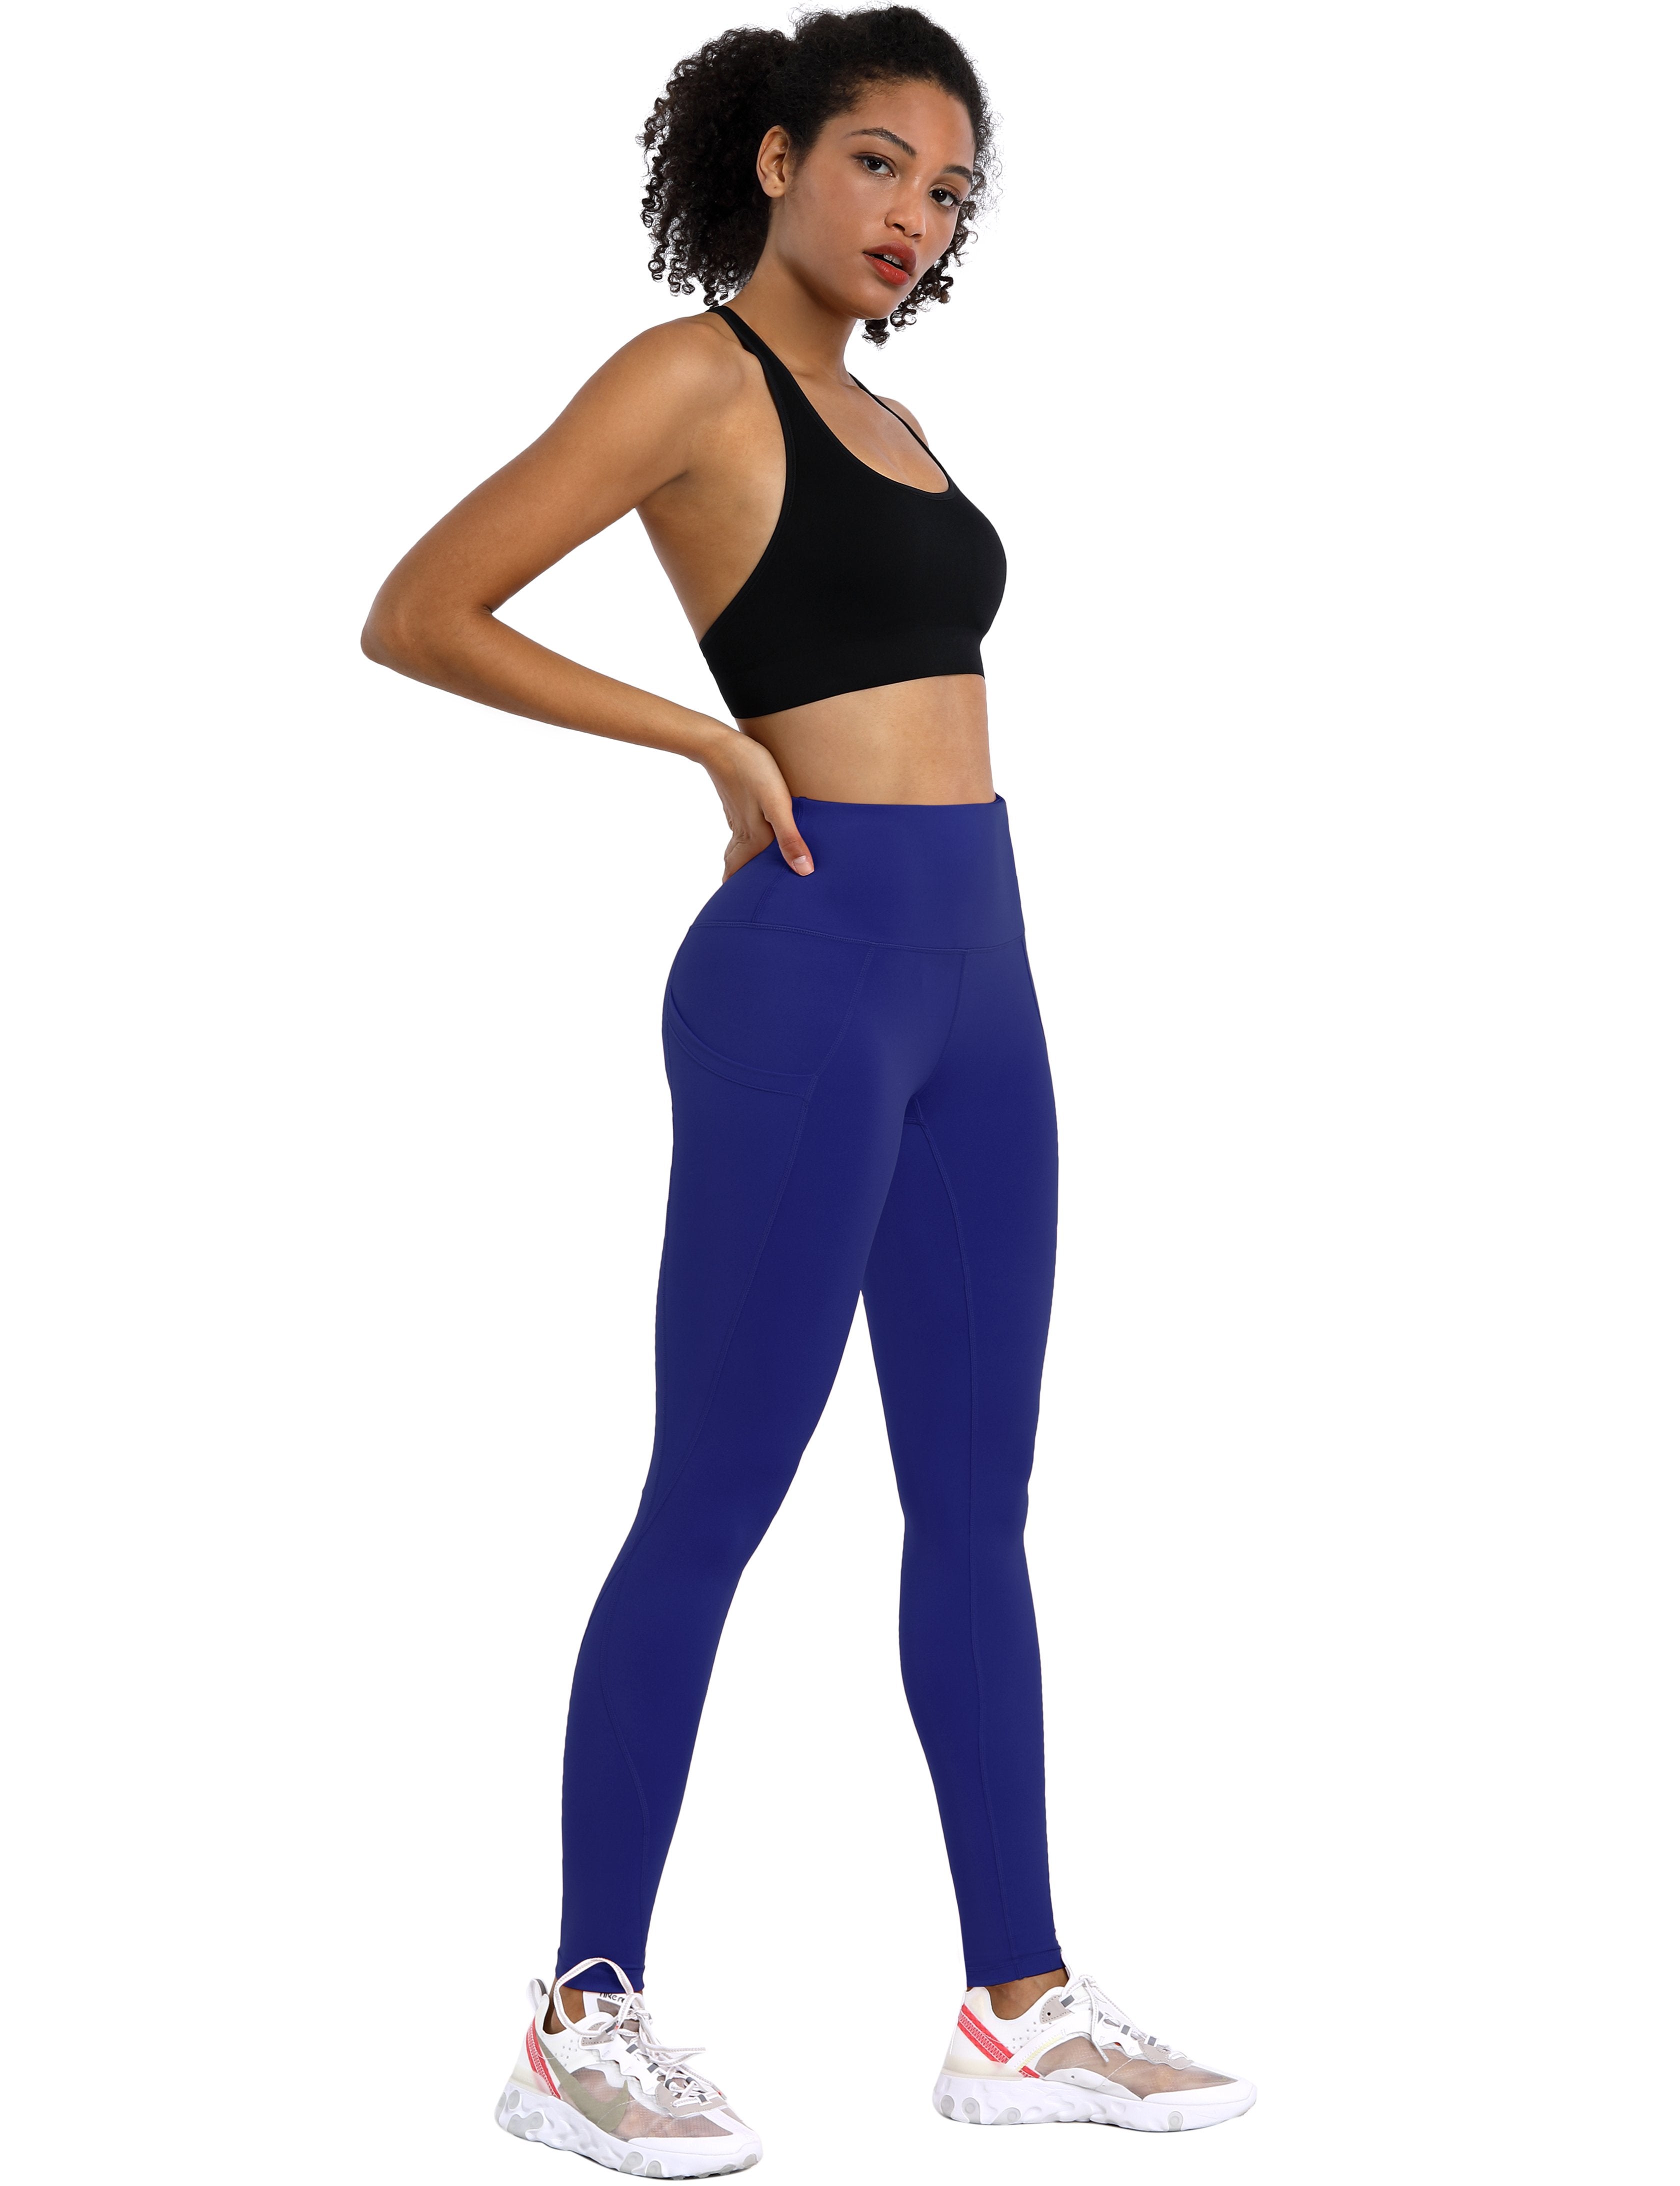 High Waist Side Pockets yogastudio Pants navy 75% Nylon, 25% Spandex Fabric doesn't attract lint easily 4-way stretch No see-through Moisture-wicking Tummy control Inner pocket